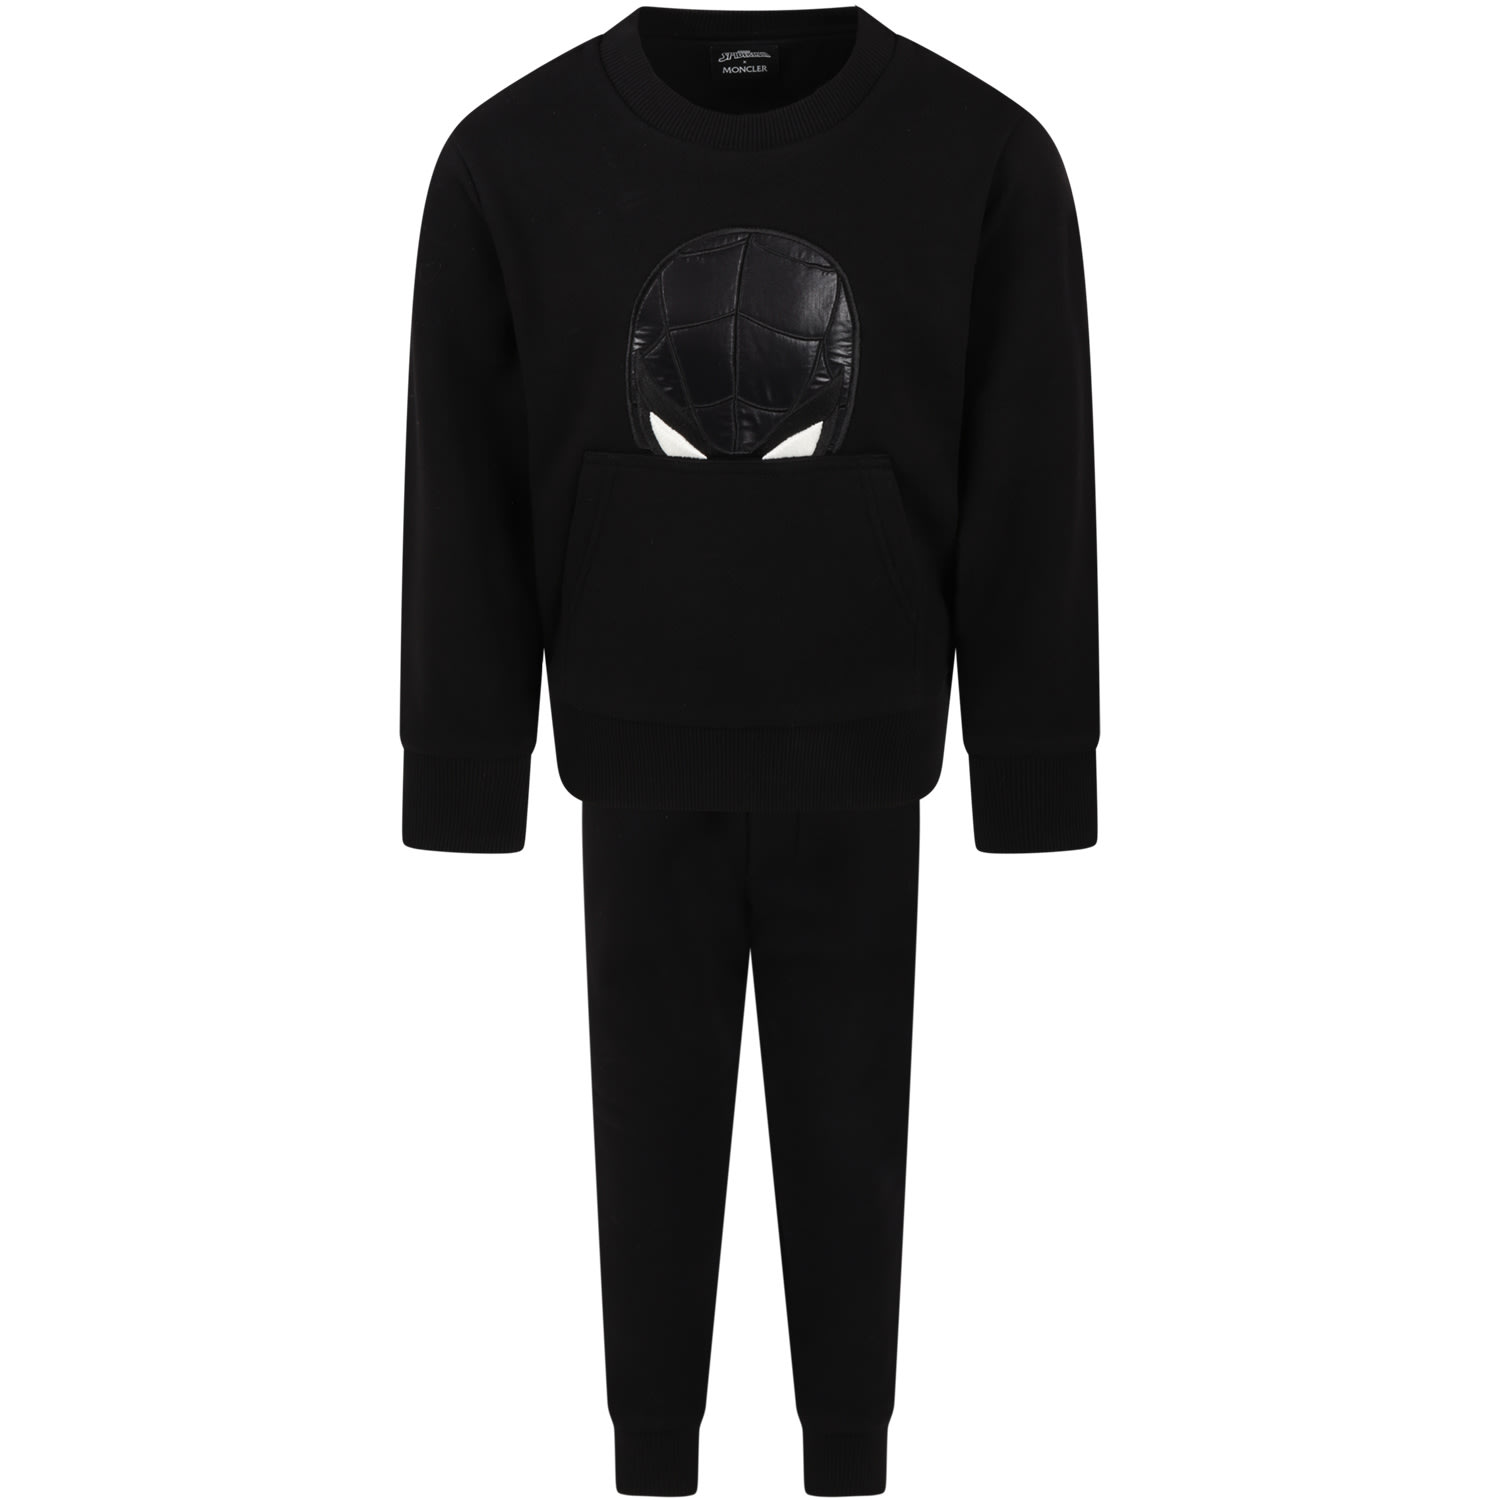 Moncler Black Tracksuit For Boy With Spiderman